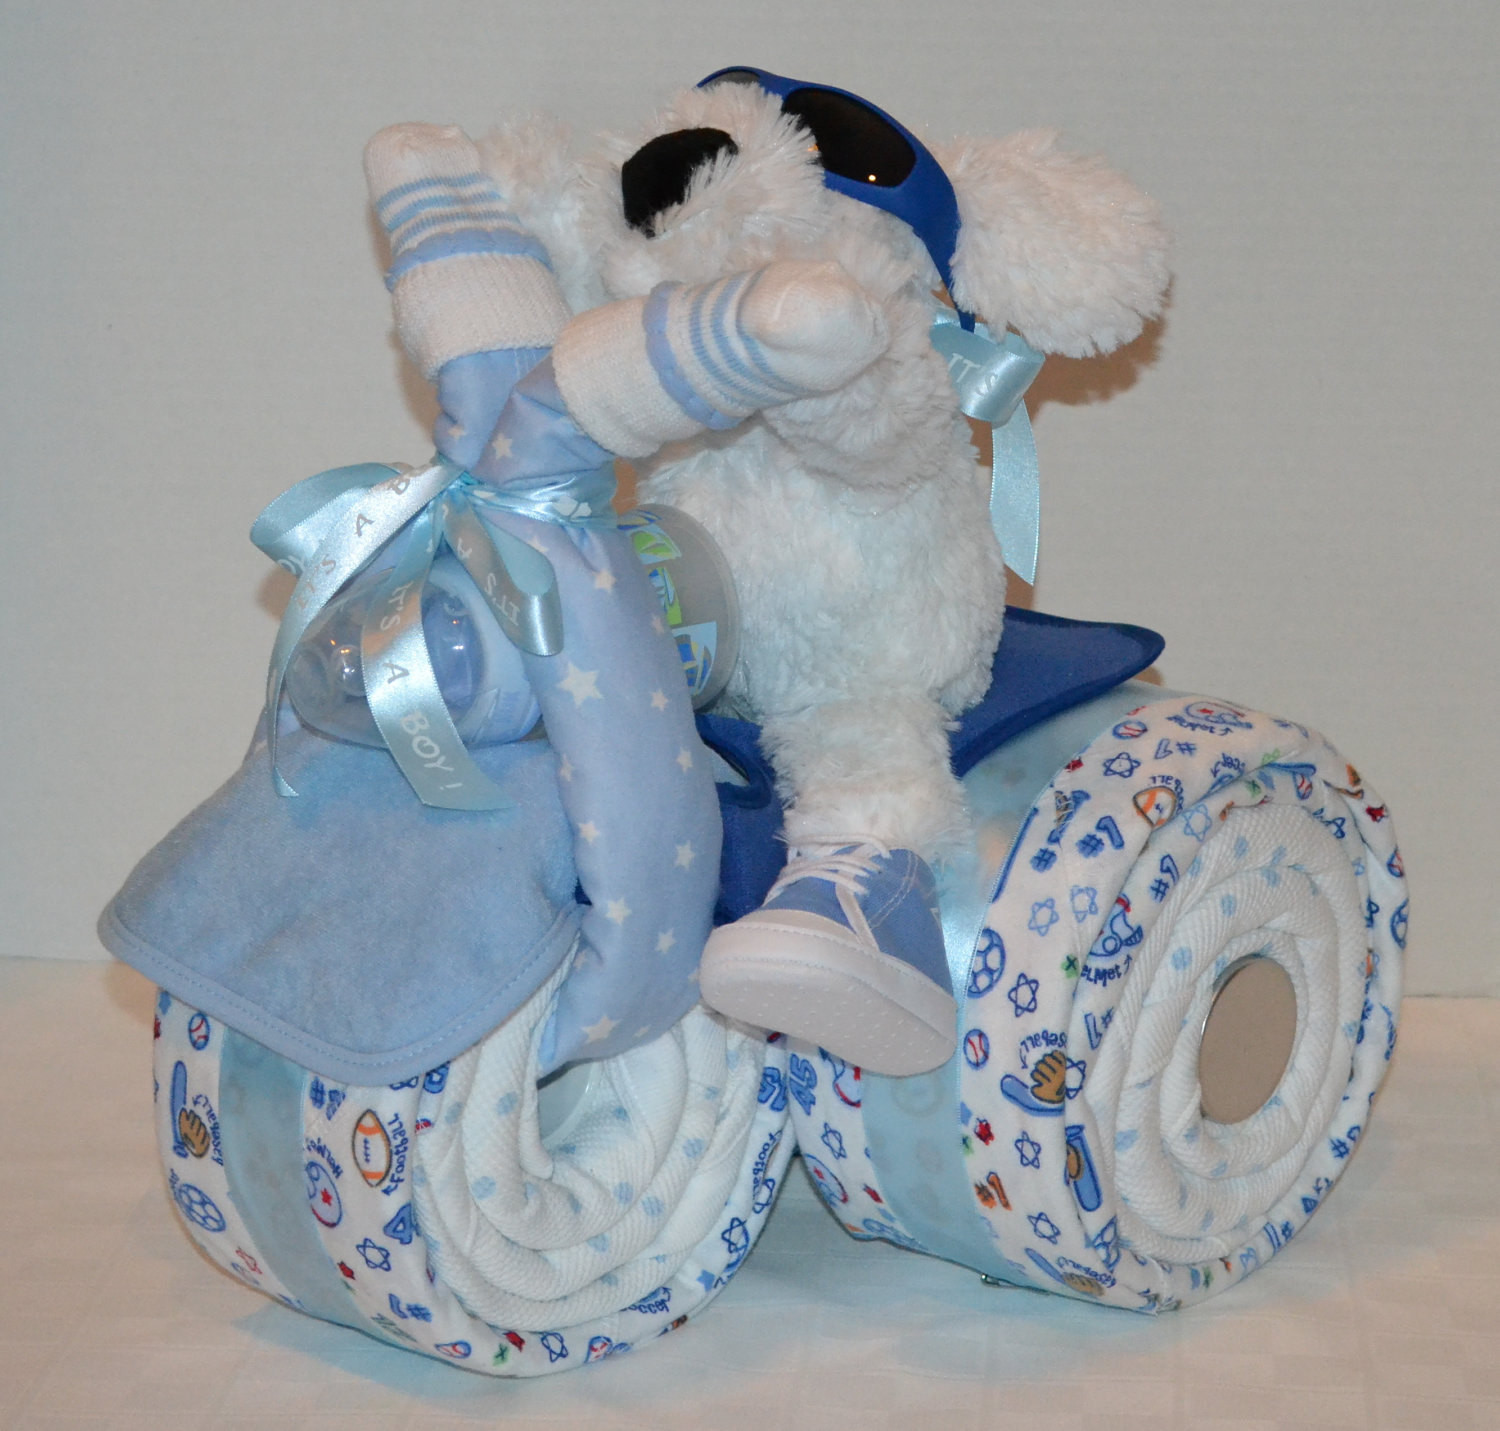 Baby Shower Gift Ideas For Boys
 Tricycle Trike Diaper Cake Baby Shower Gift Sports theme